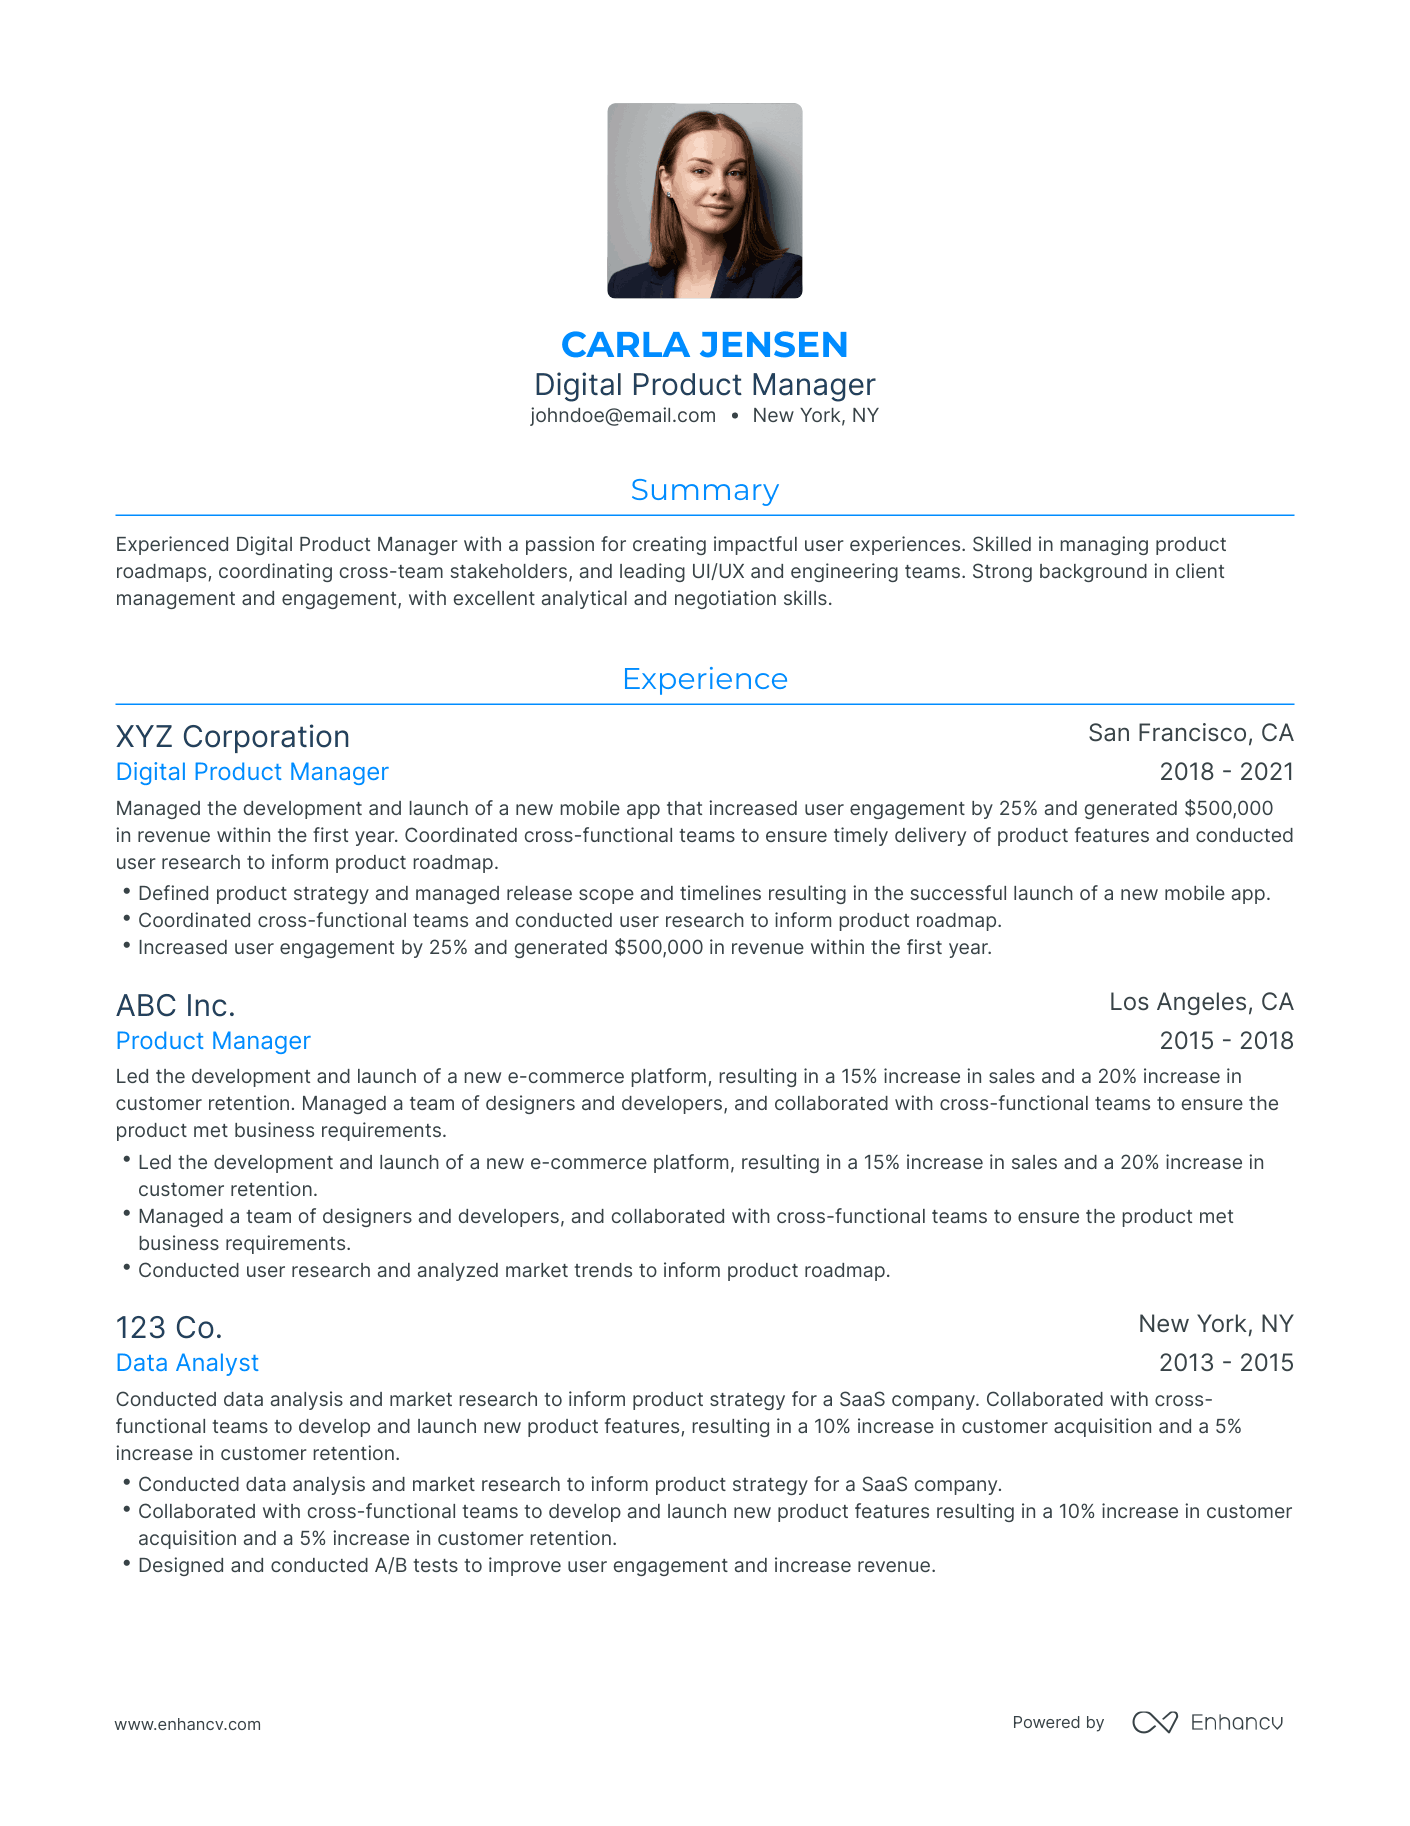 Traditional Digital Product Manager Resume Template